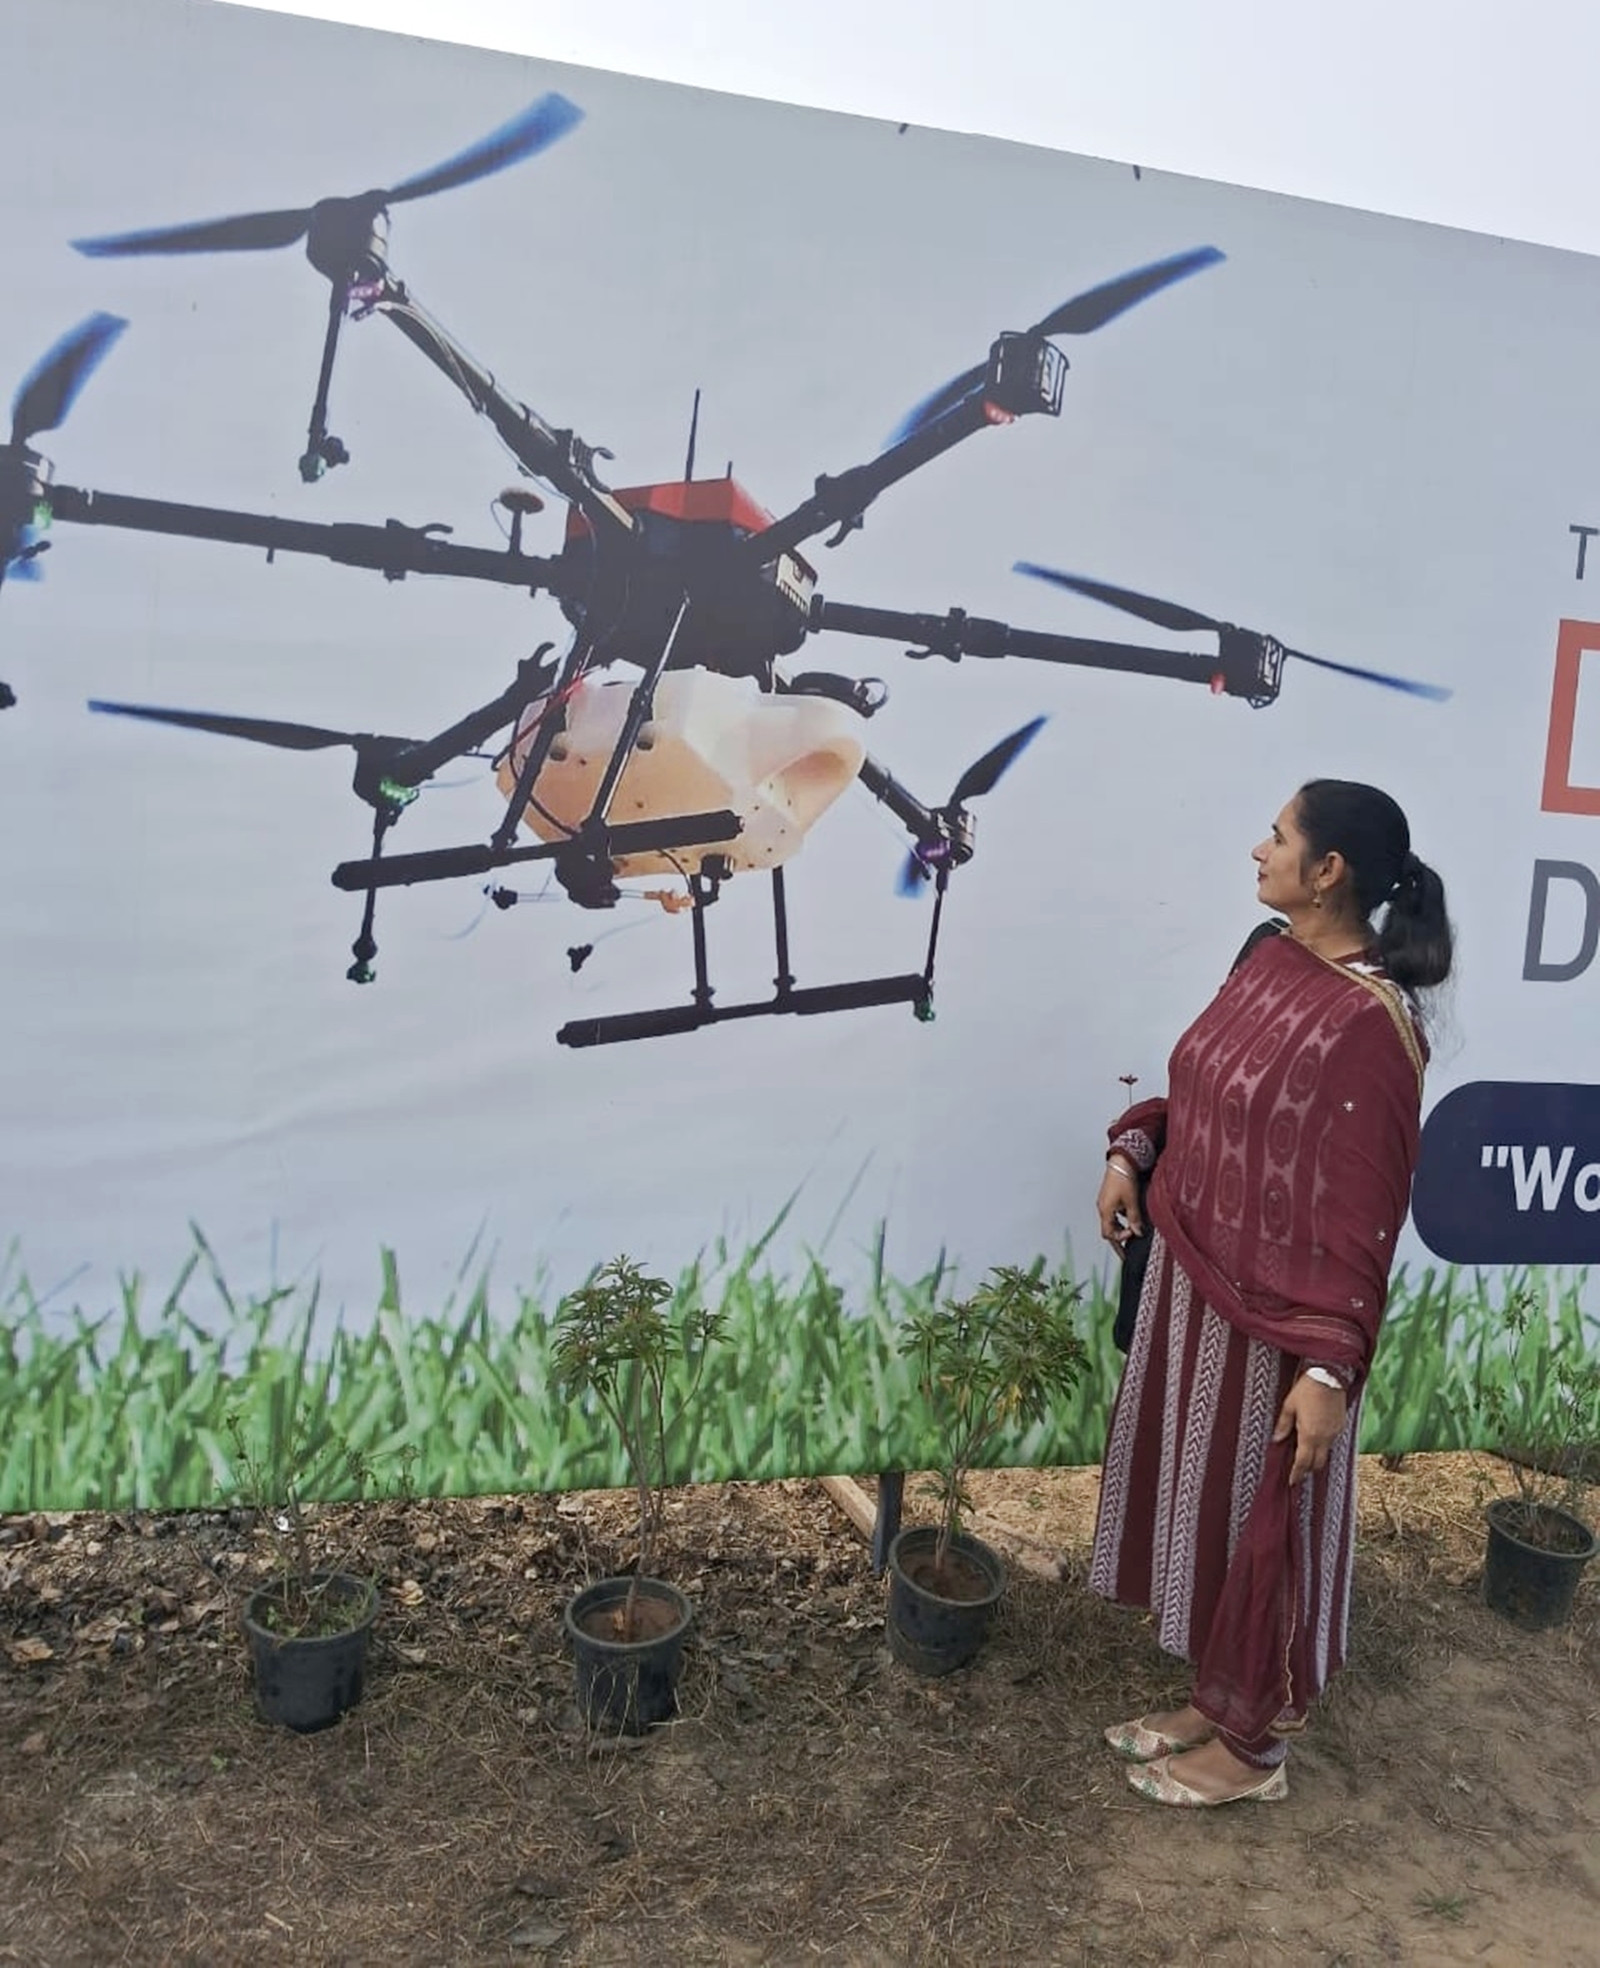 Drone Didis will earn Rs 12 lakh a year if they spray 20 acres for 200 days at the cost of Rs 300 per acre.